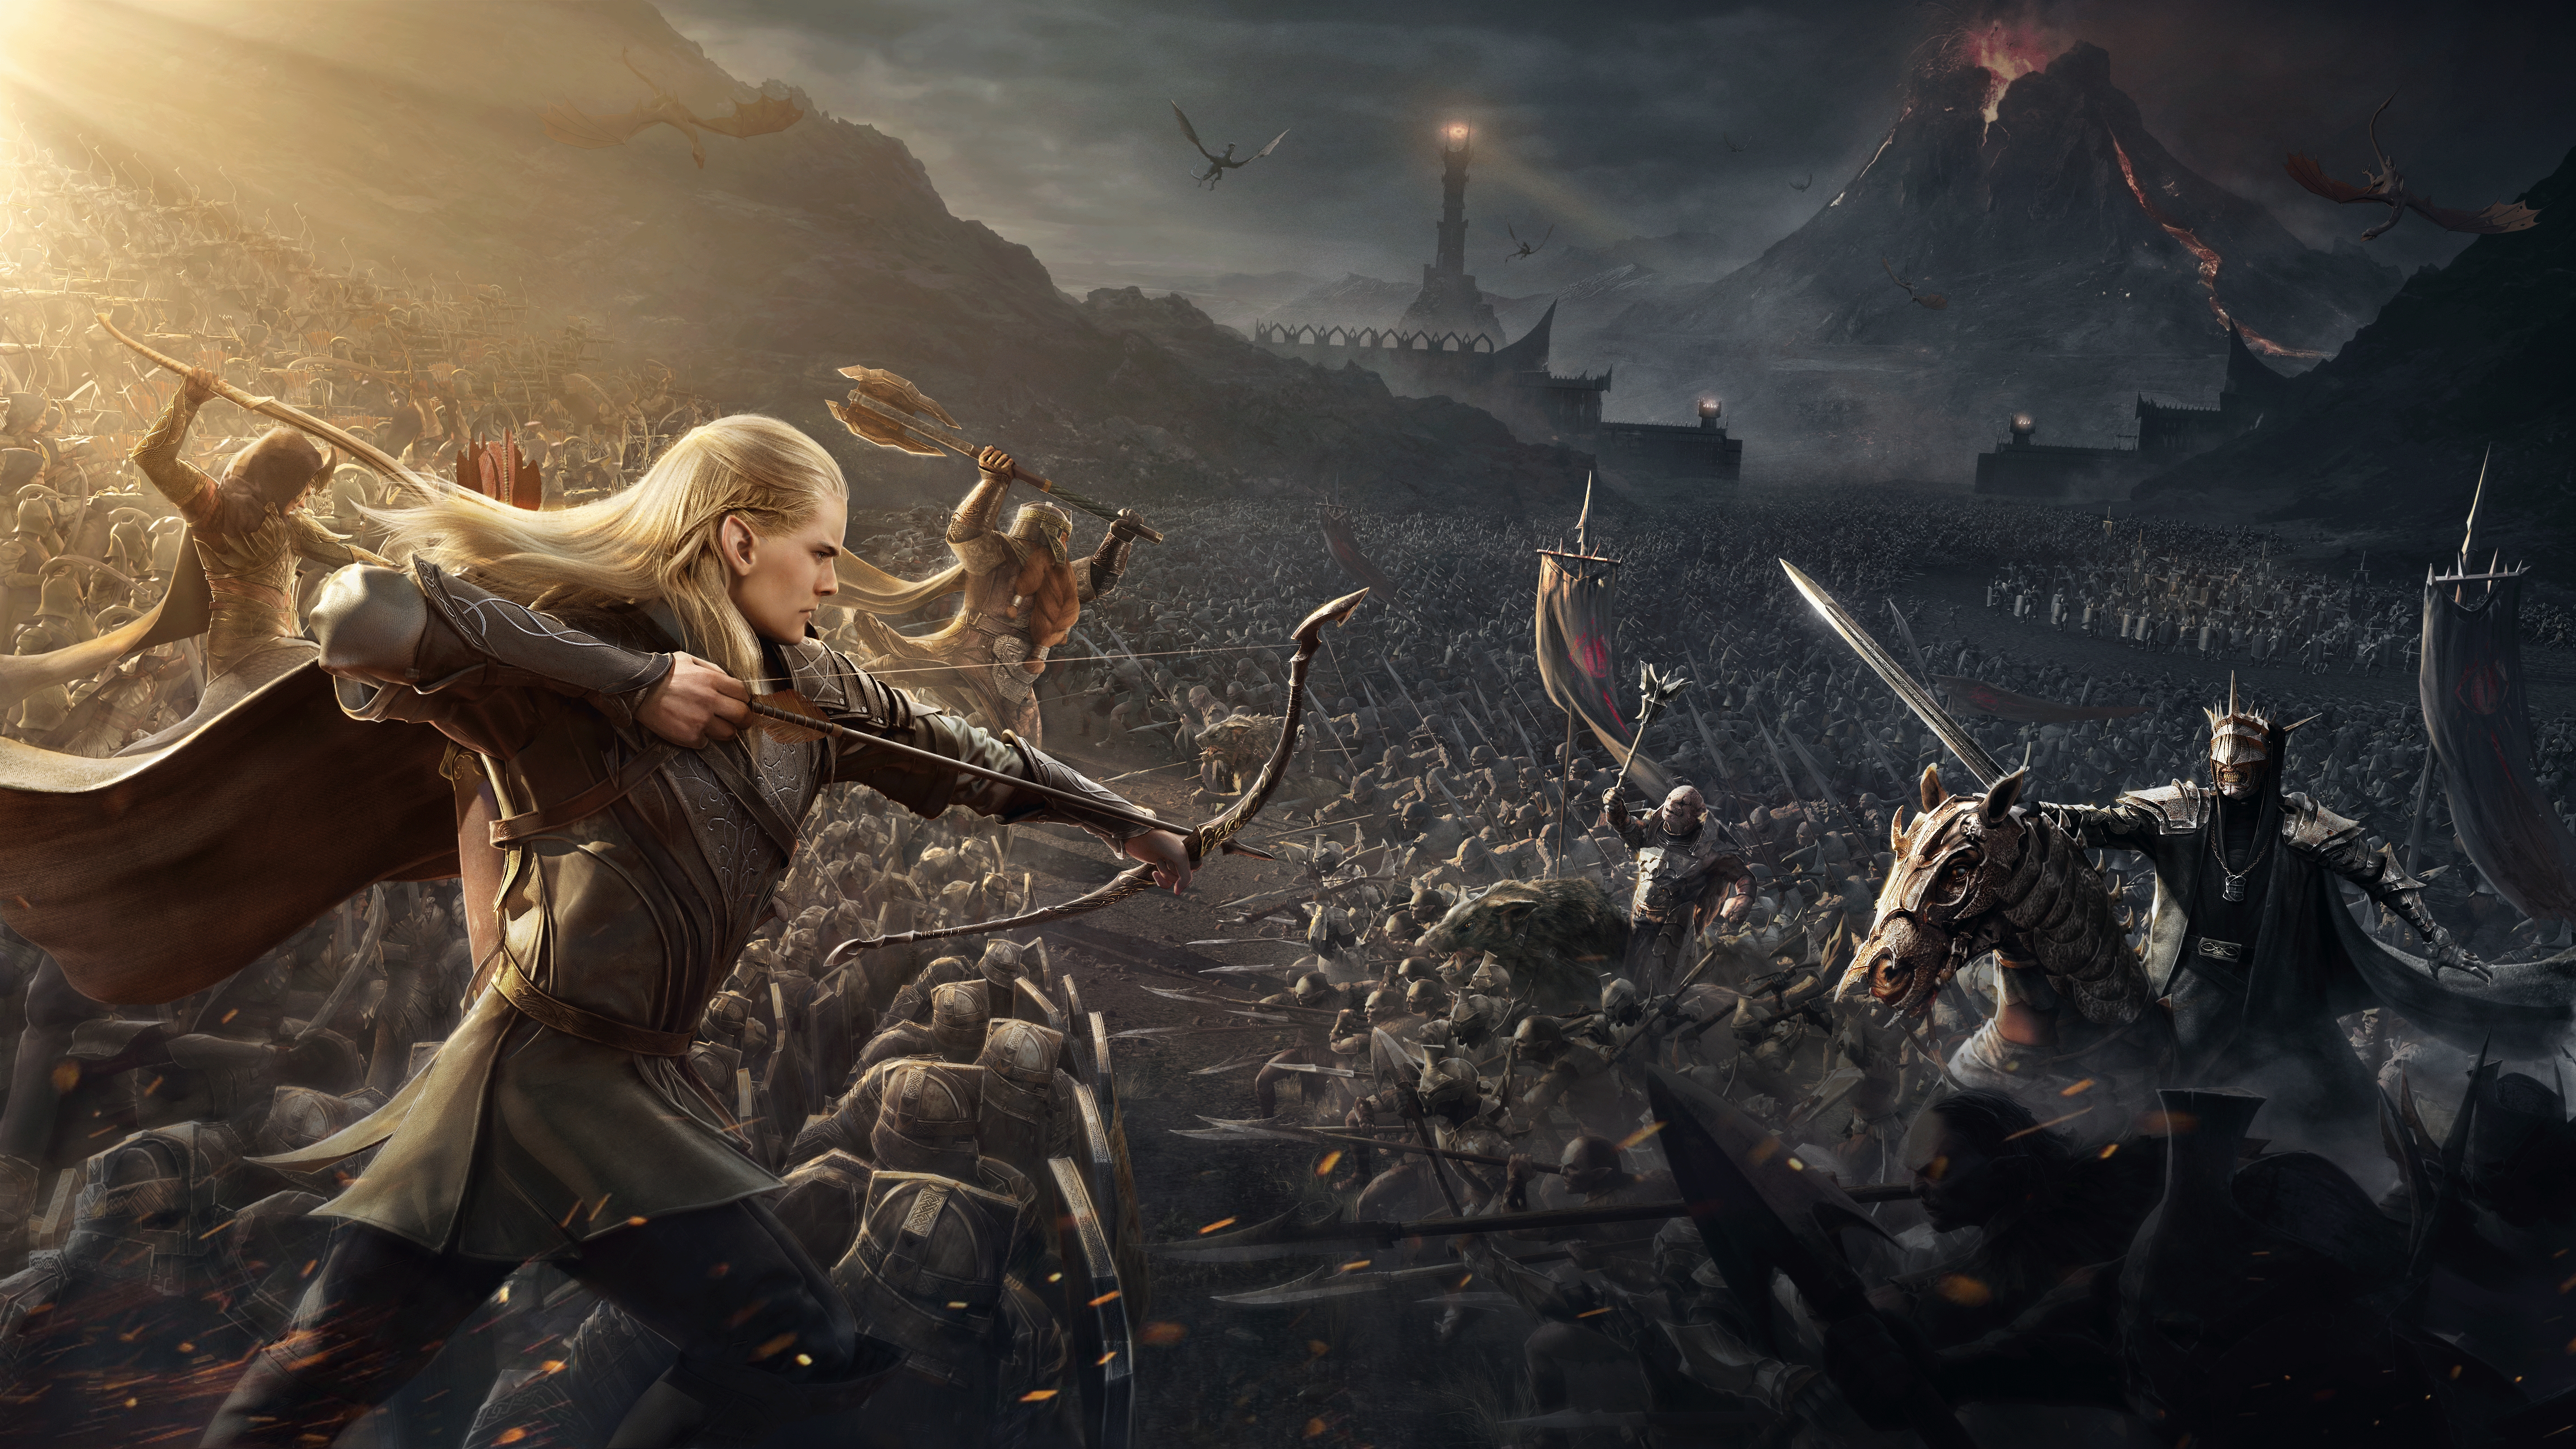 HD wallpaper, Battle Of The Black Gate, Lord Of The Rings, 5K